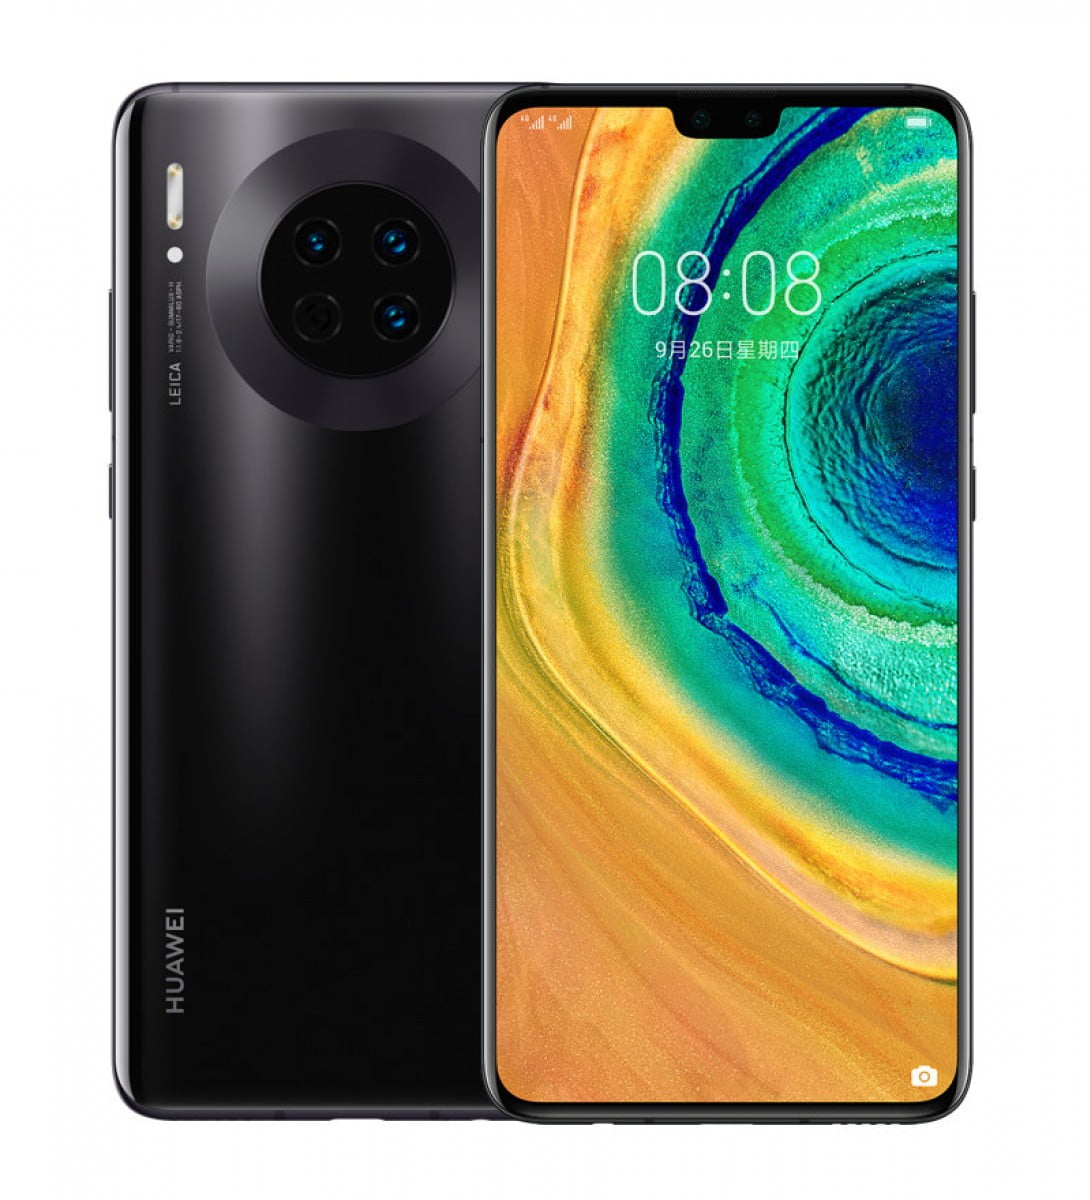 Huawei Mate 30 & Mate 30 Pro Unveiled With Kirin 990 & More